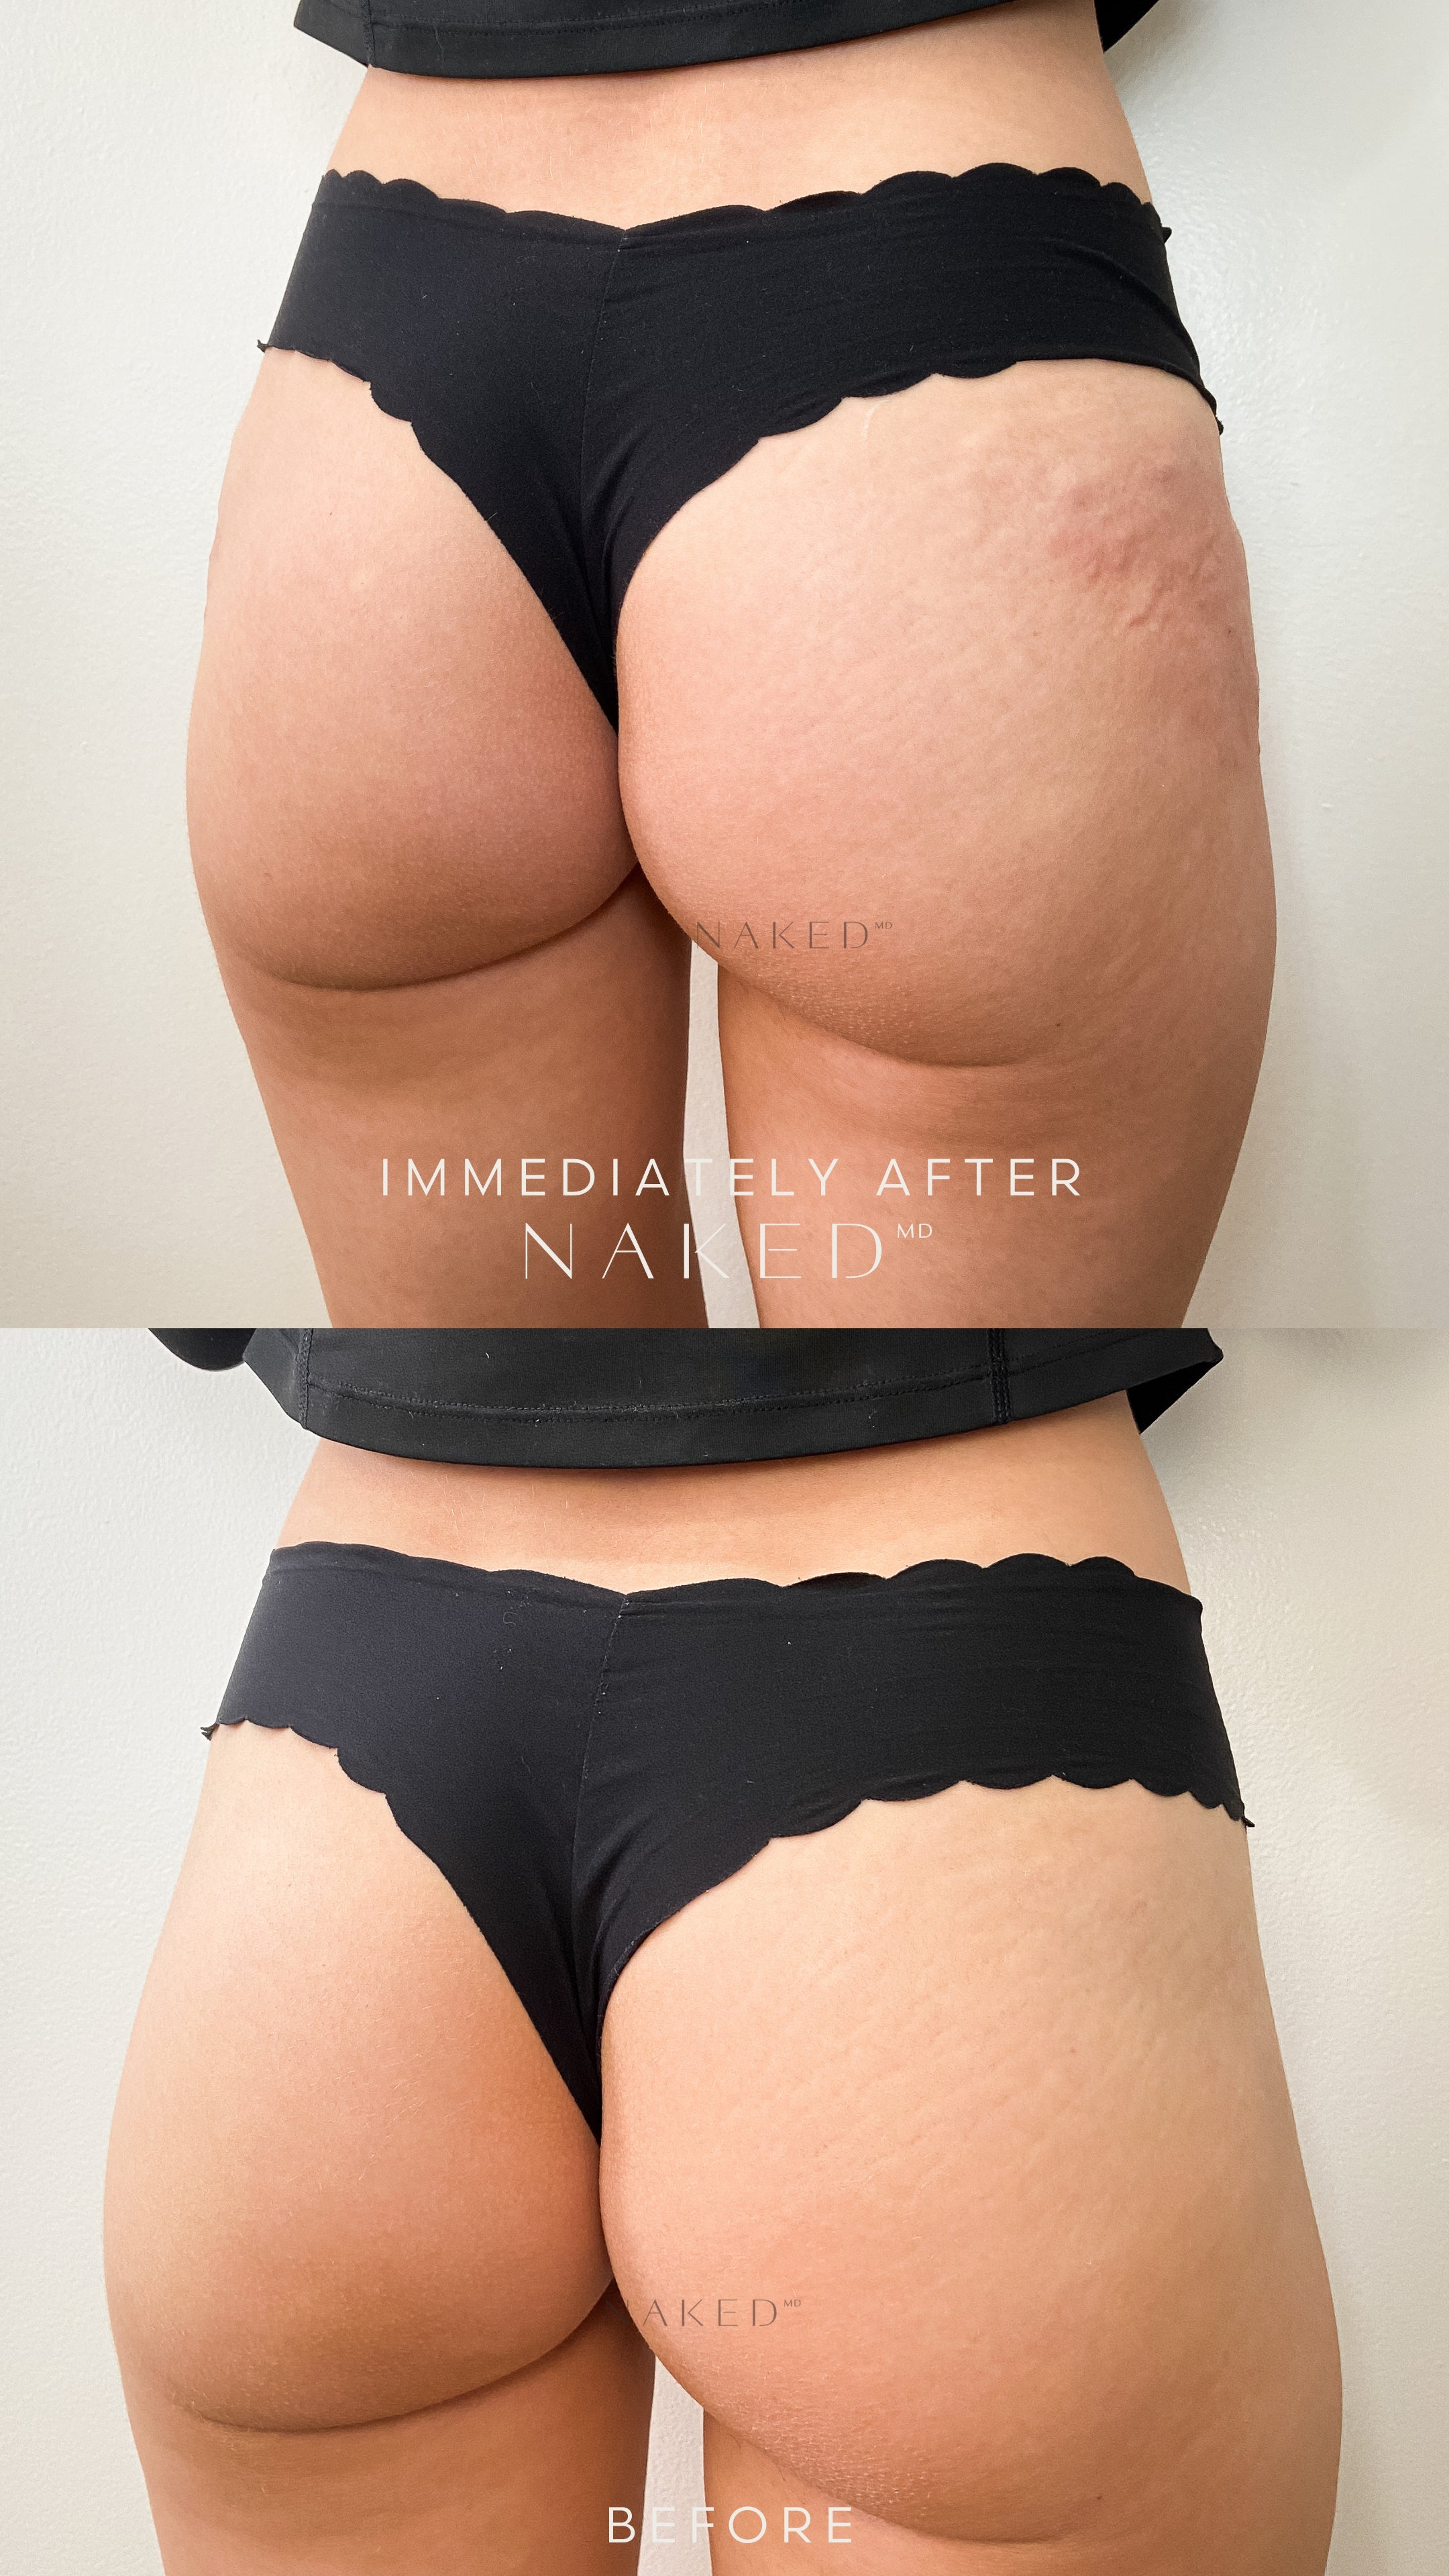 Naked Booty® Non Surgical Brazilian Butt Lift (BBL)